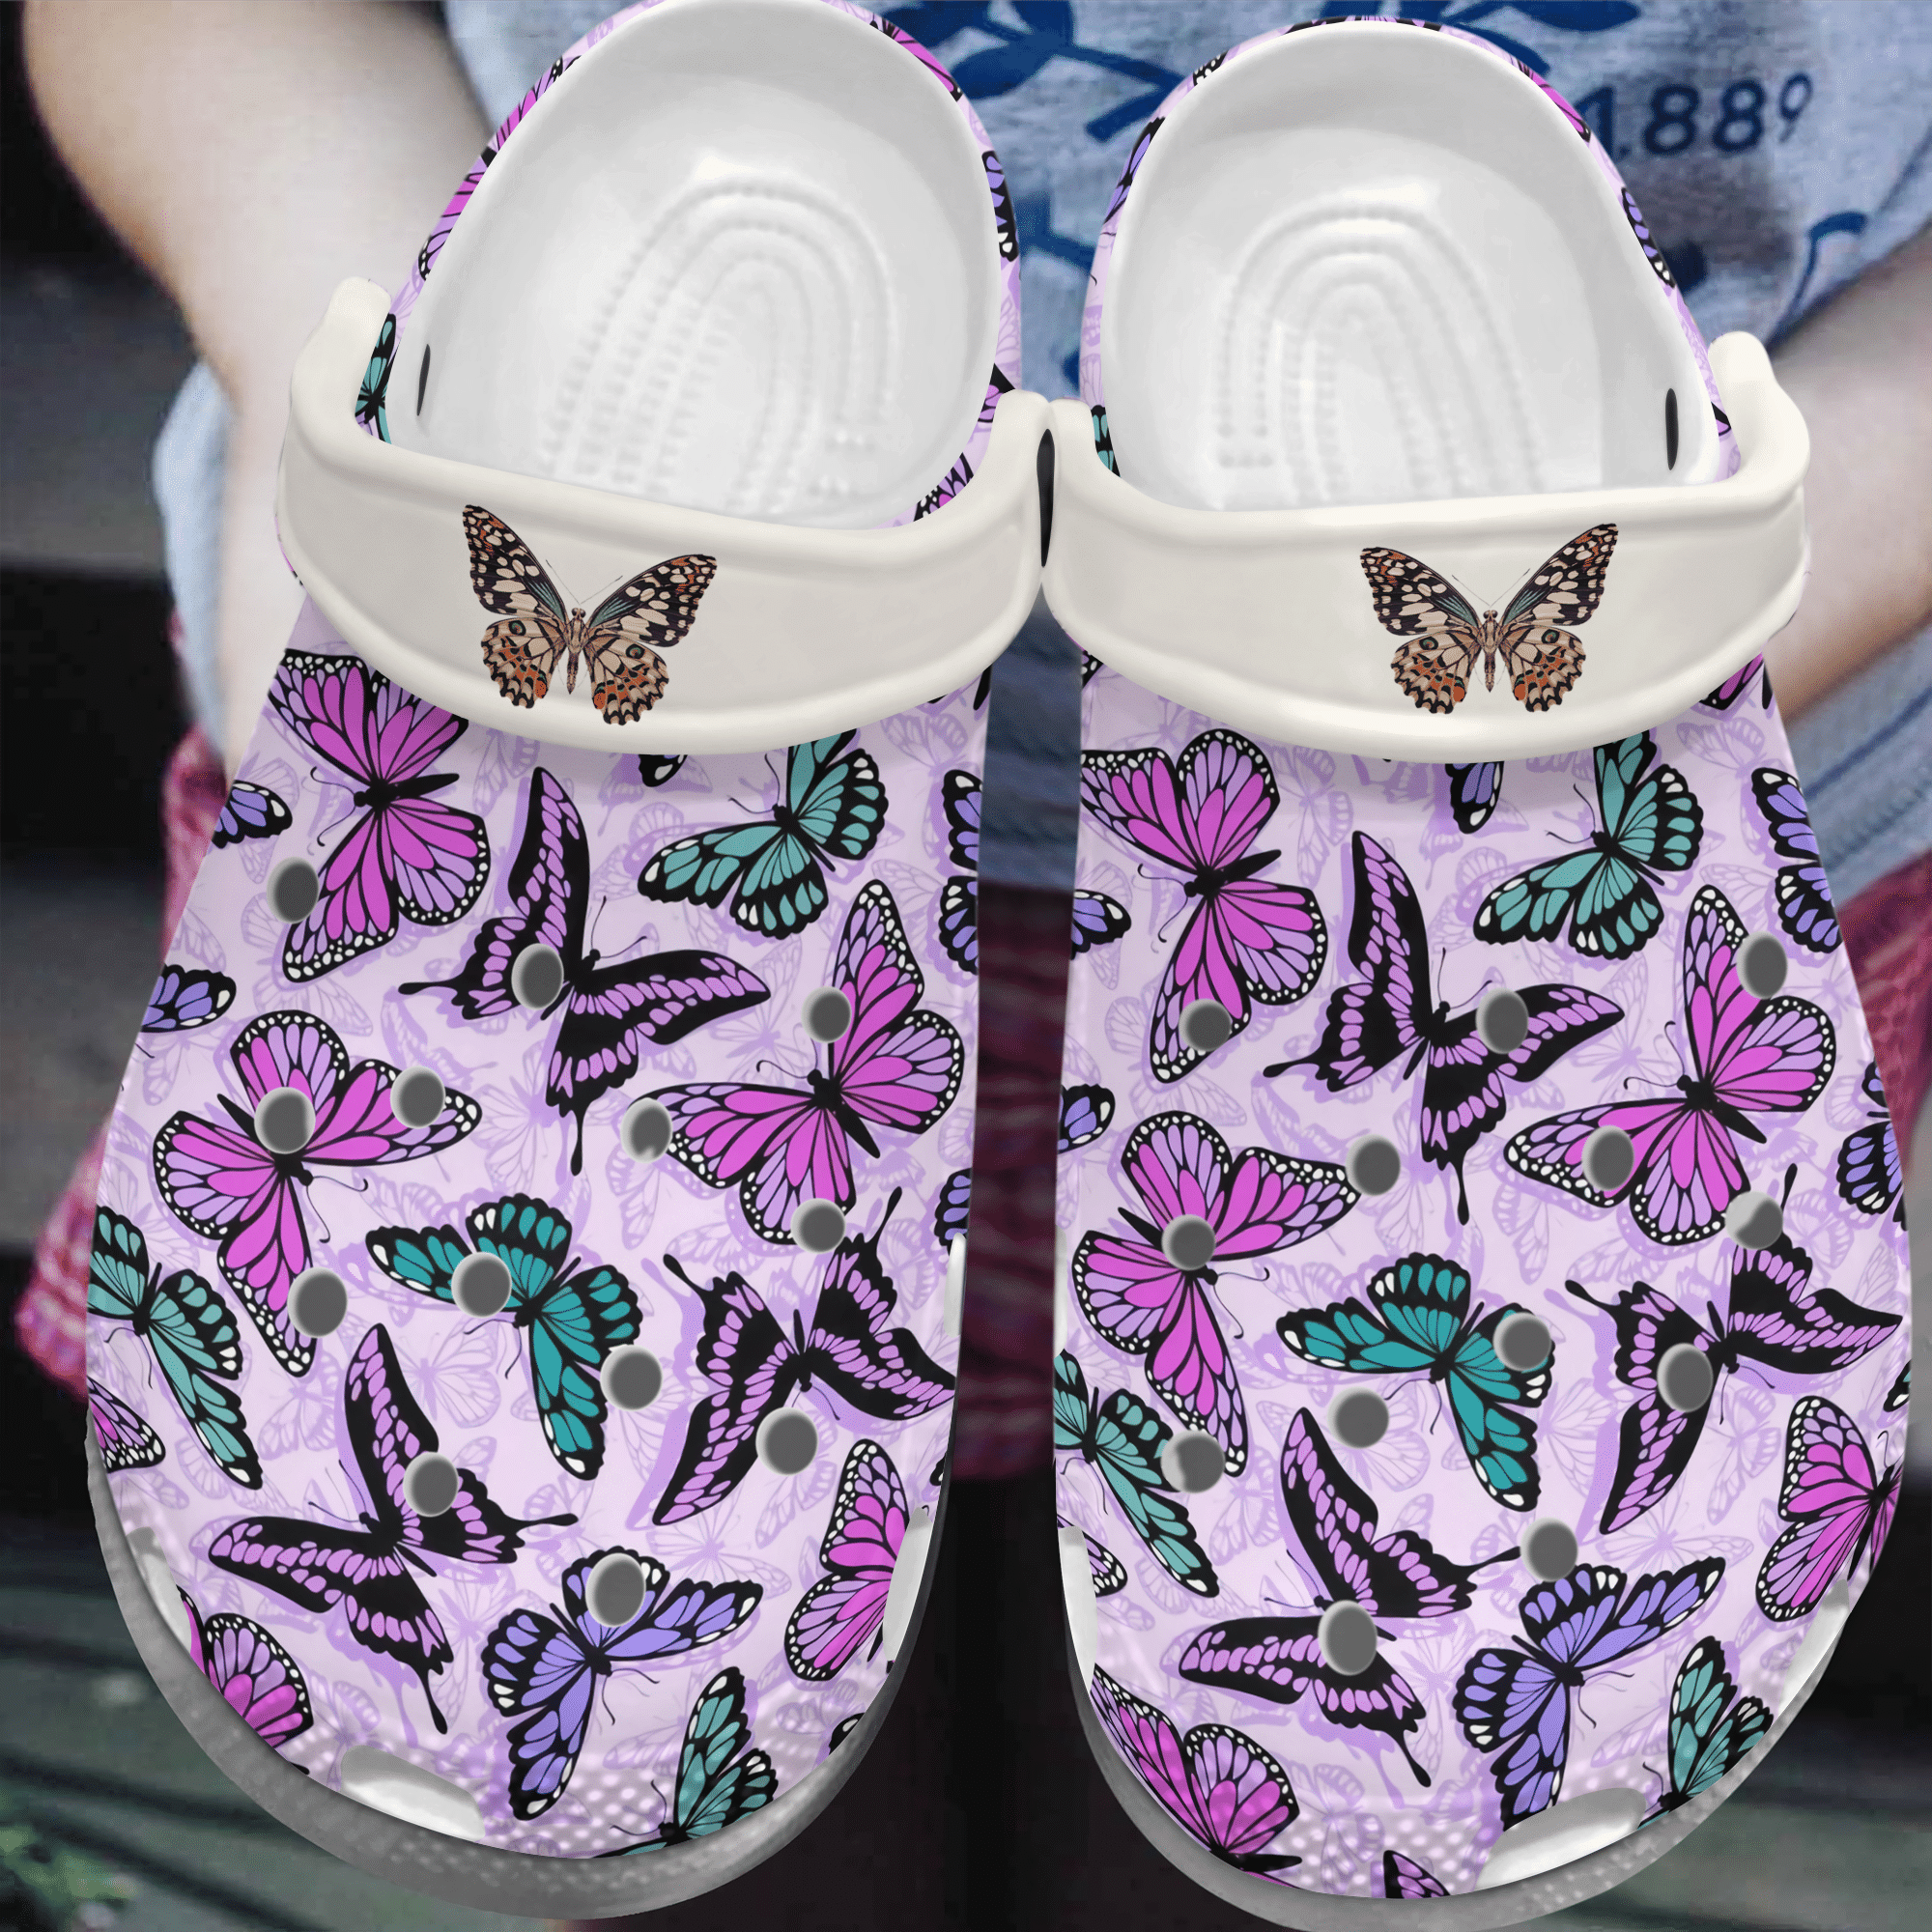 Full Of Butterflies Crocs Shoes Crocbland Clogs Gifts